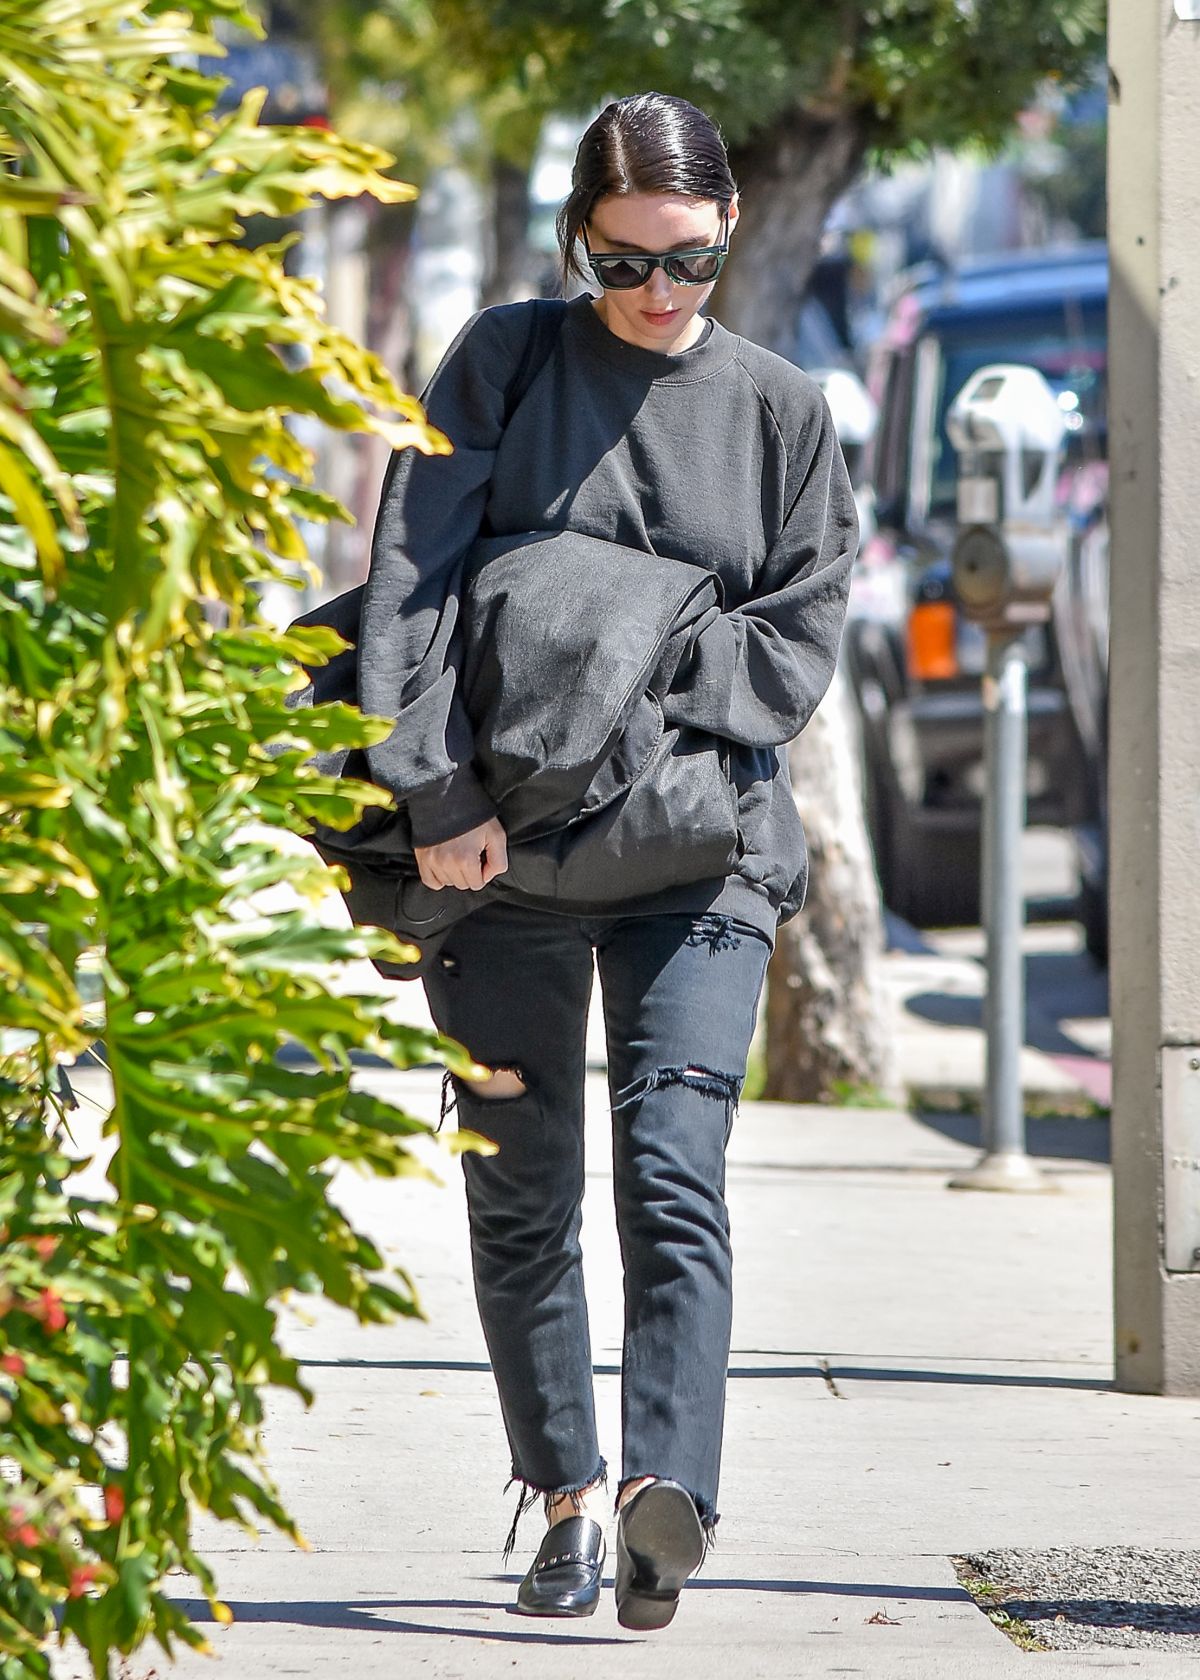 ROONEY MARA Out and About in Los Angeles 03/27/2018 – HawtCelebs